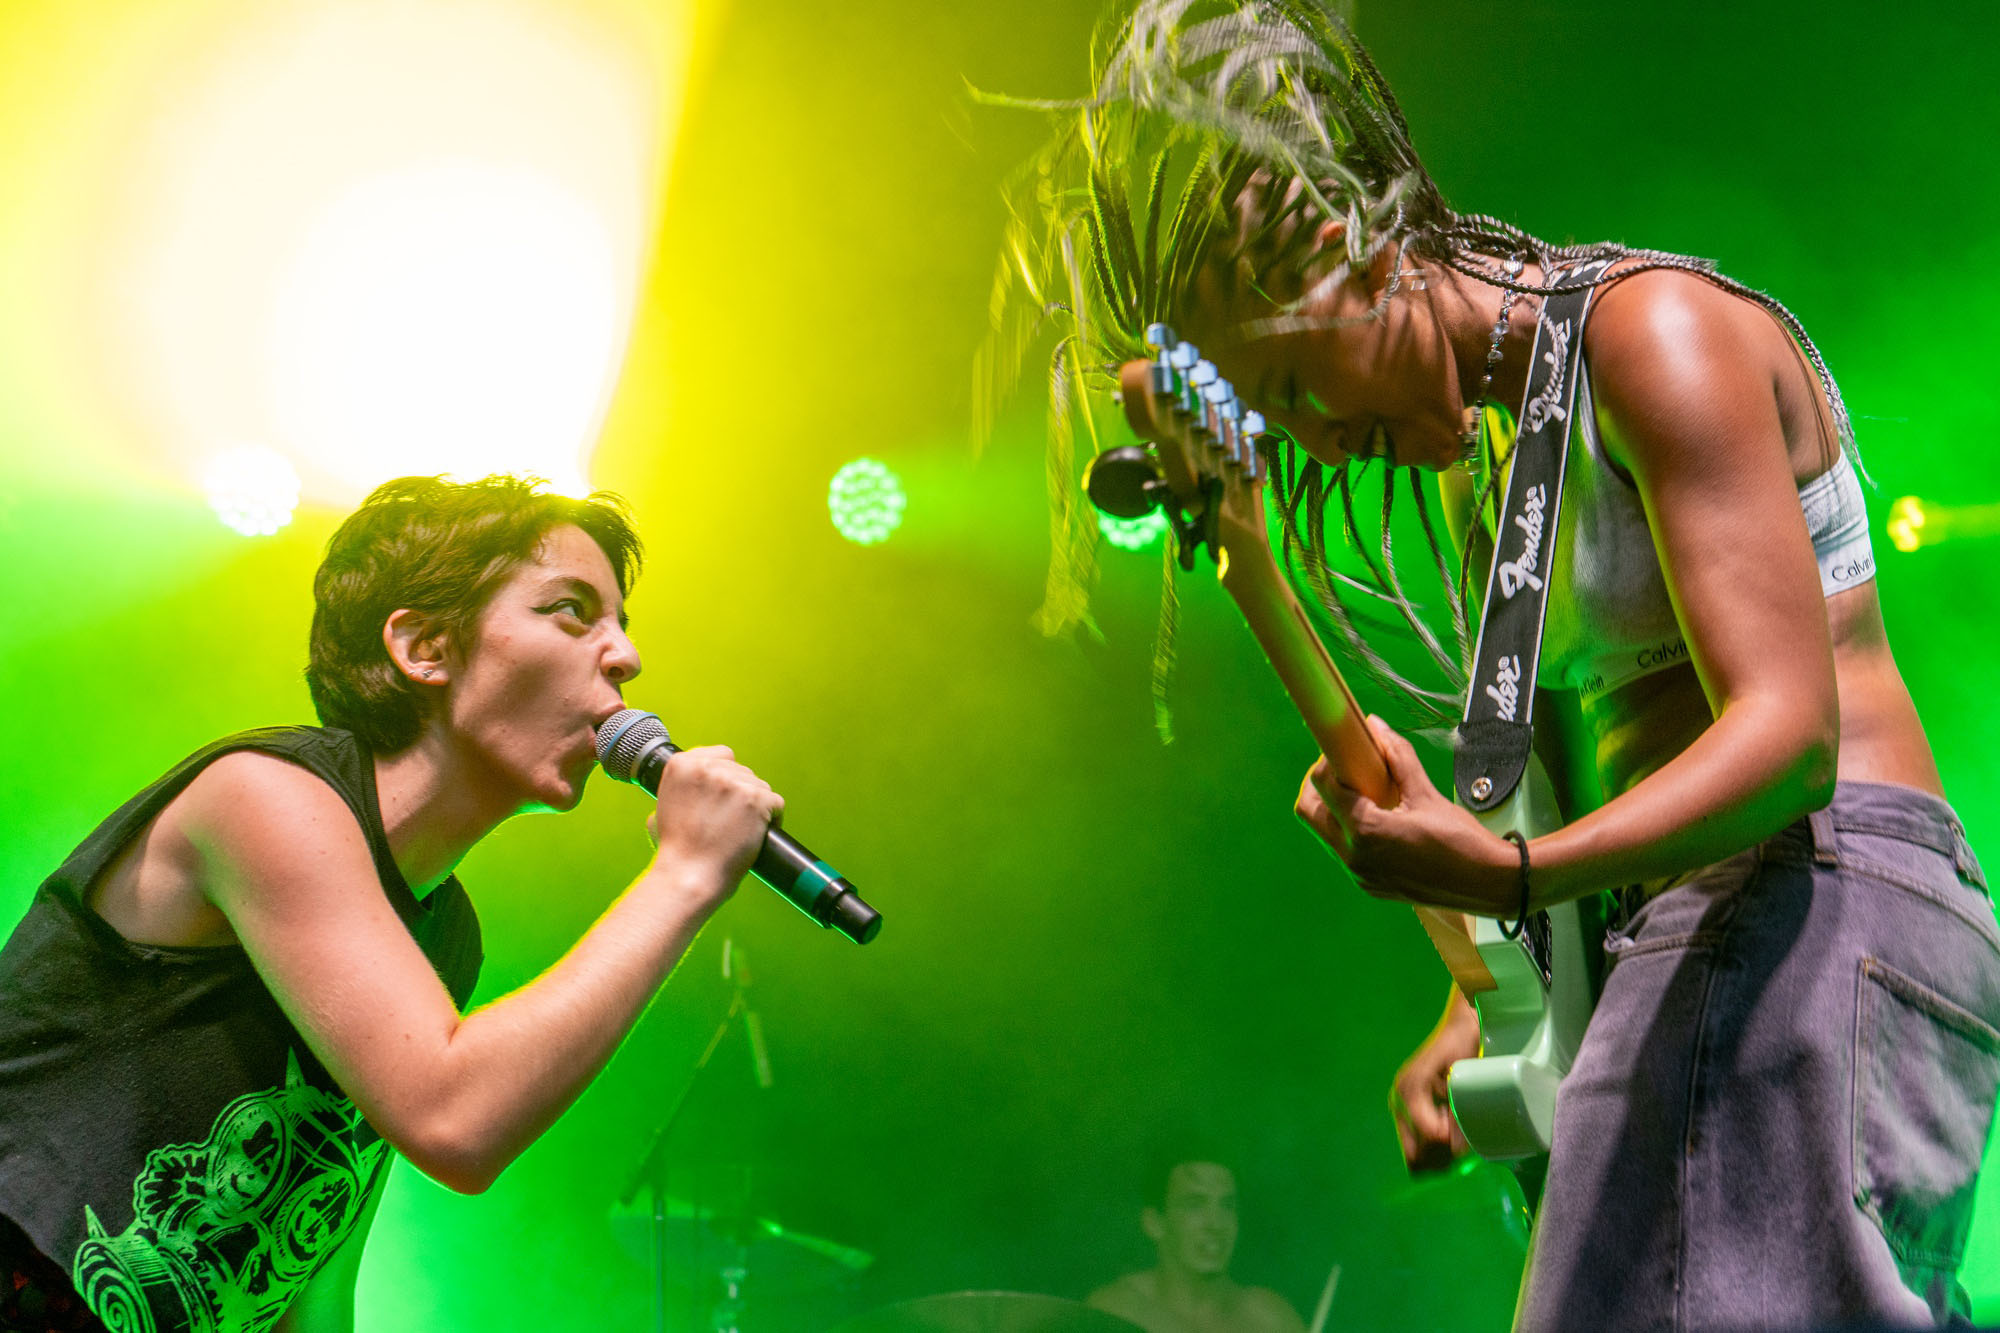 Sierra S. Stocker ’25 and Chloe M. Becker ’25 rock out during Crimson Jam as part of student punk band STRYK9.